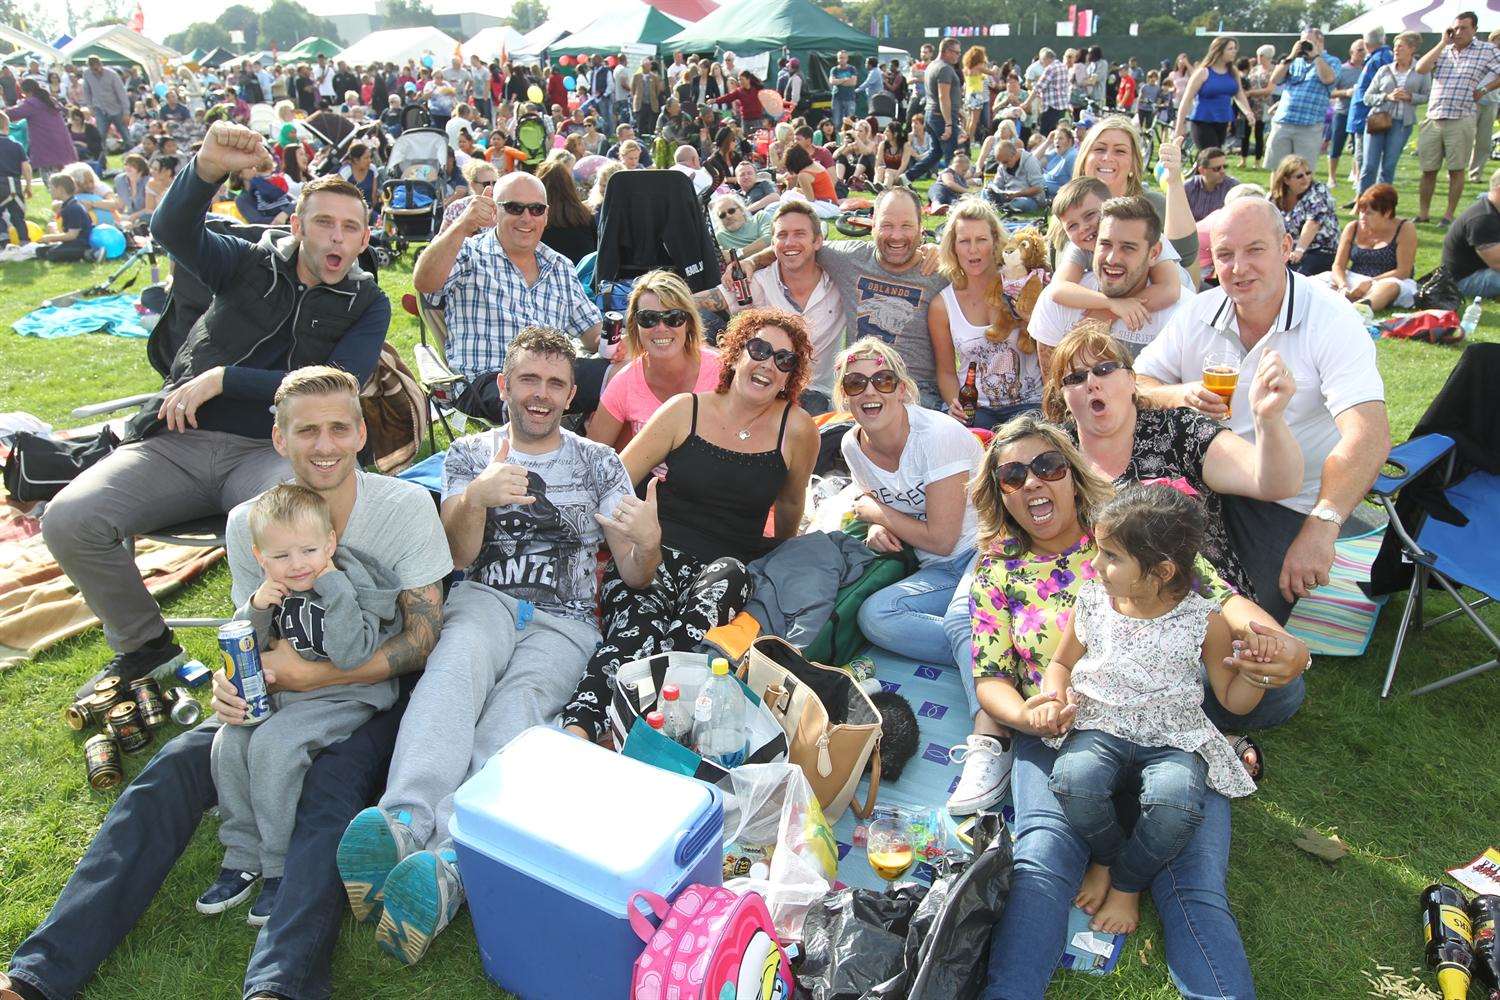 The crowds gathered at Mote Park for this year's Mela